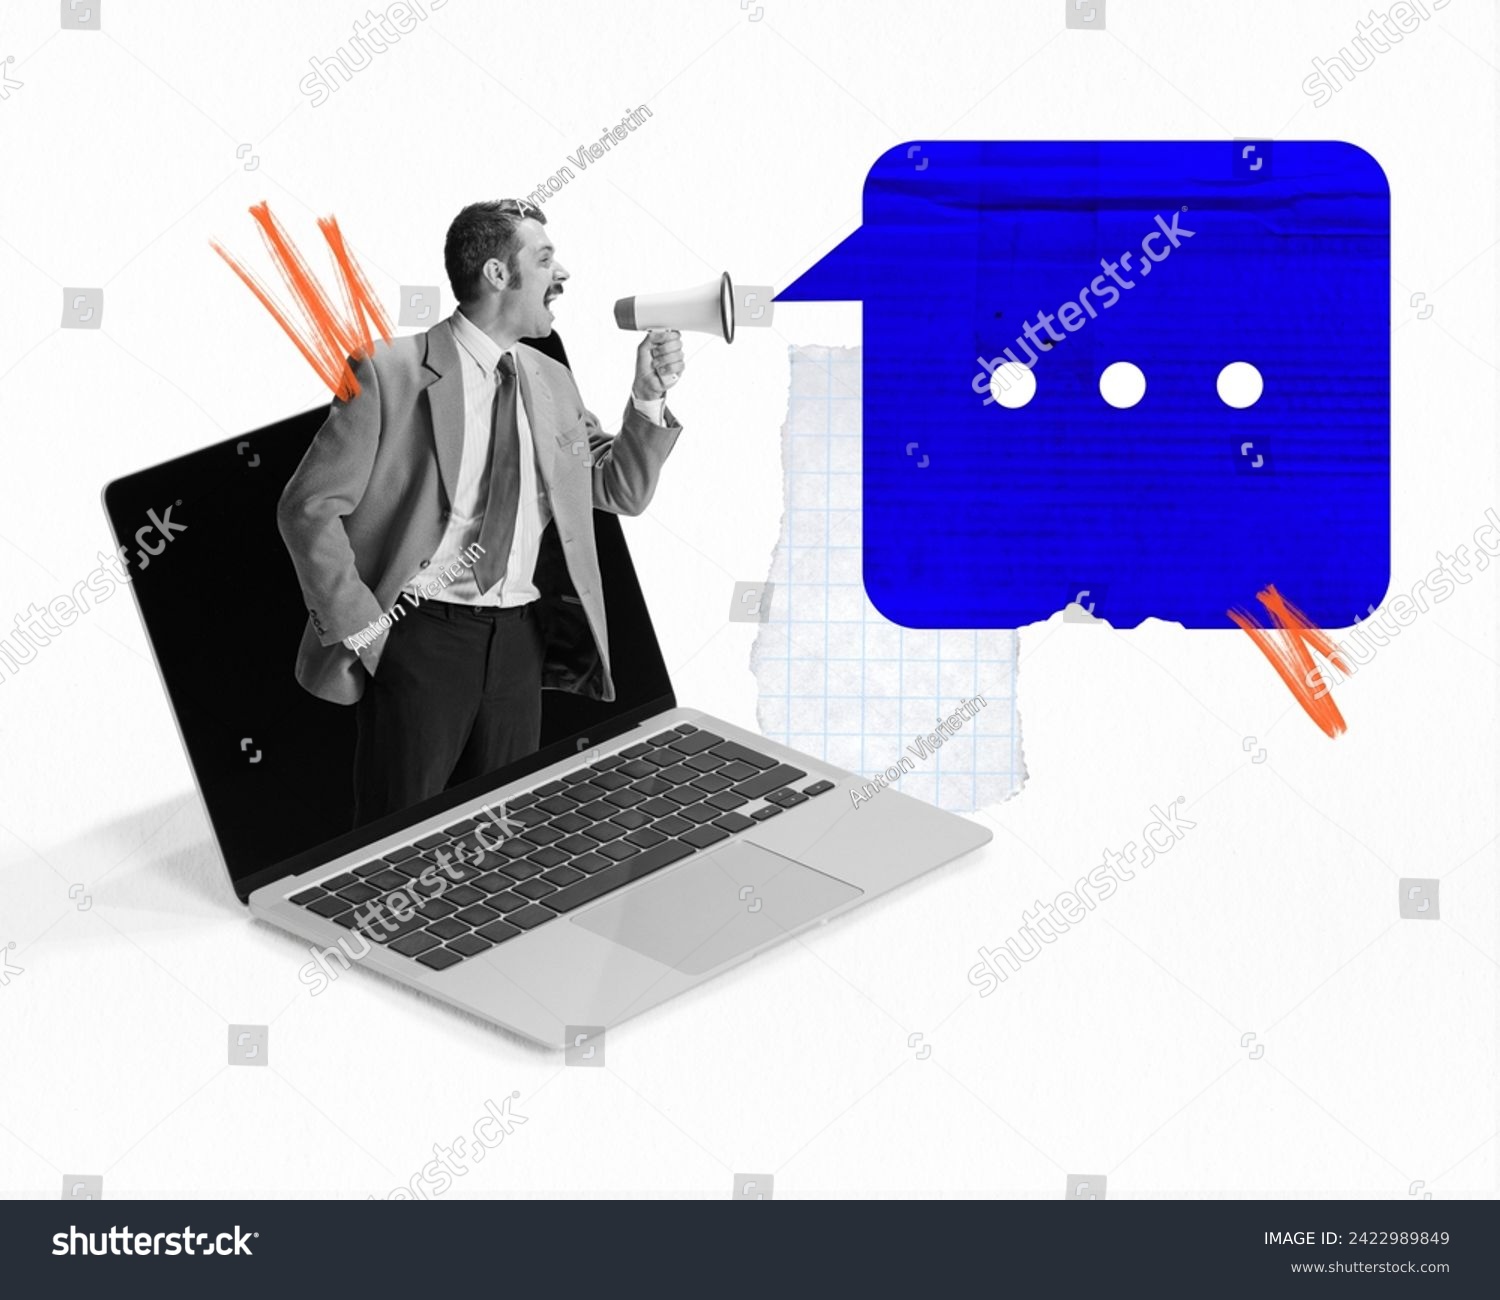 Poster. Contemporary art collage. Work hunter. Young man loudly shouting to megaphone standing in laptop with blank screen. Concept of business, communication, social media, news. Ad #2422989849